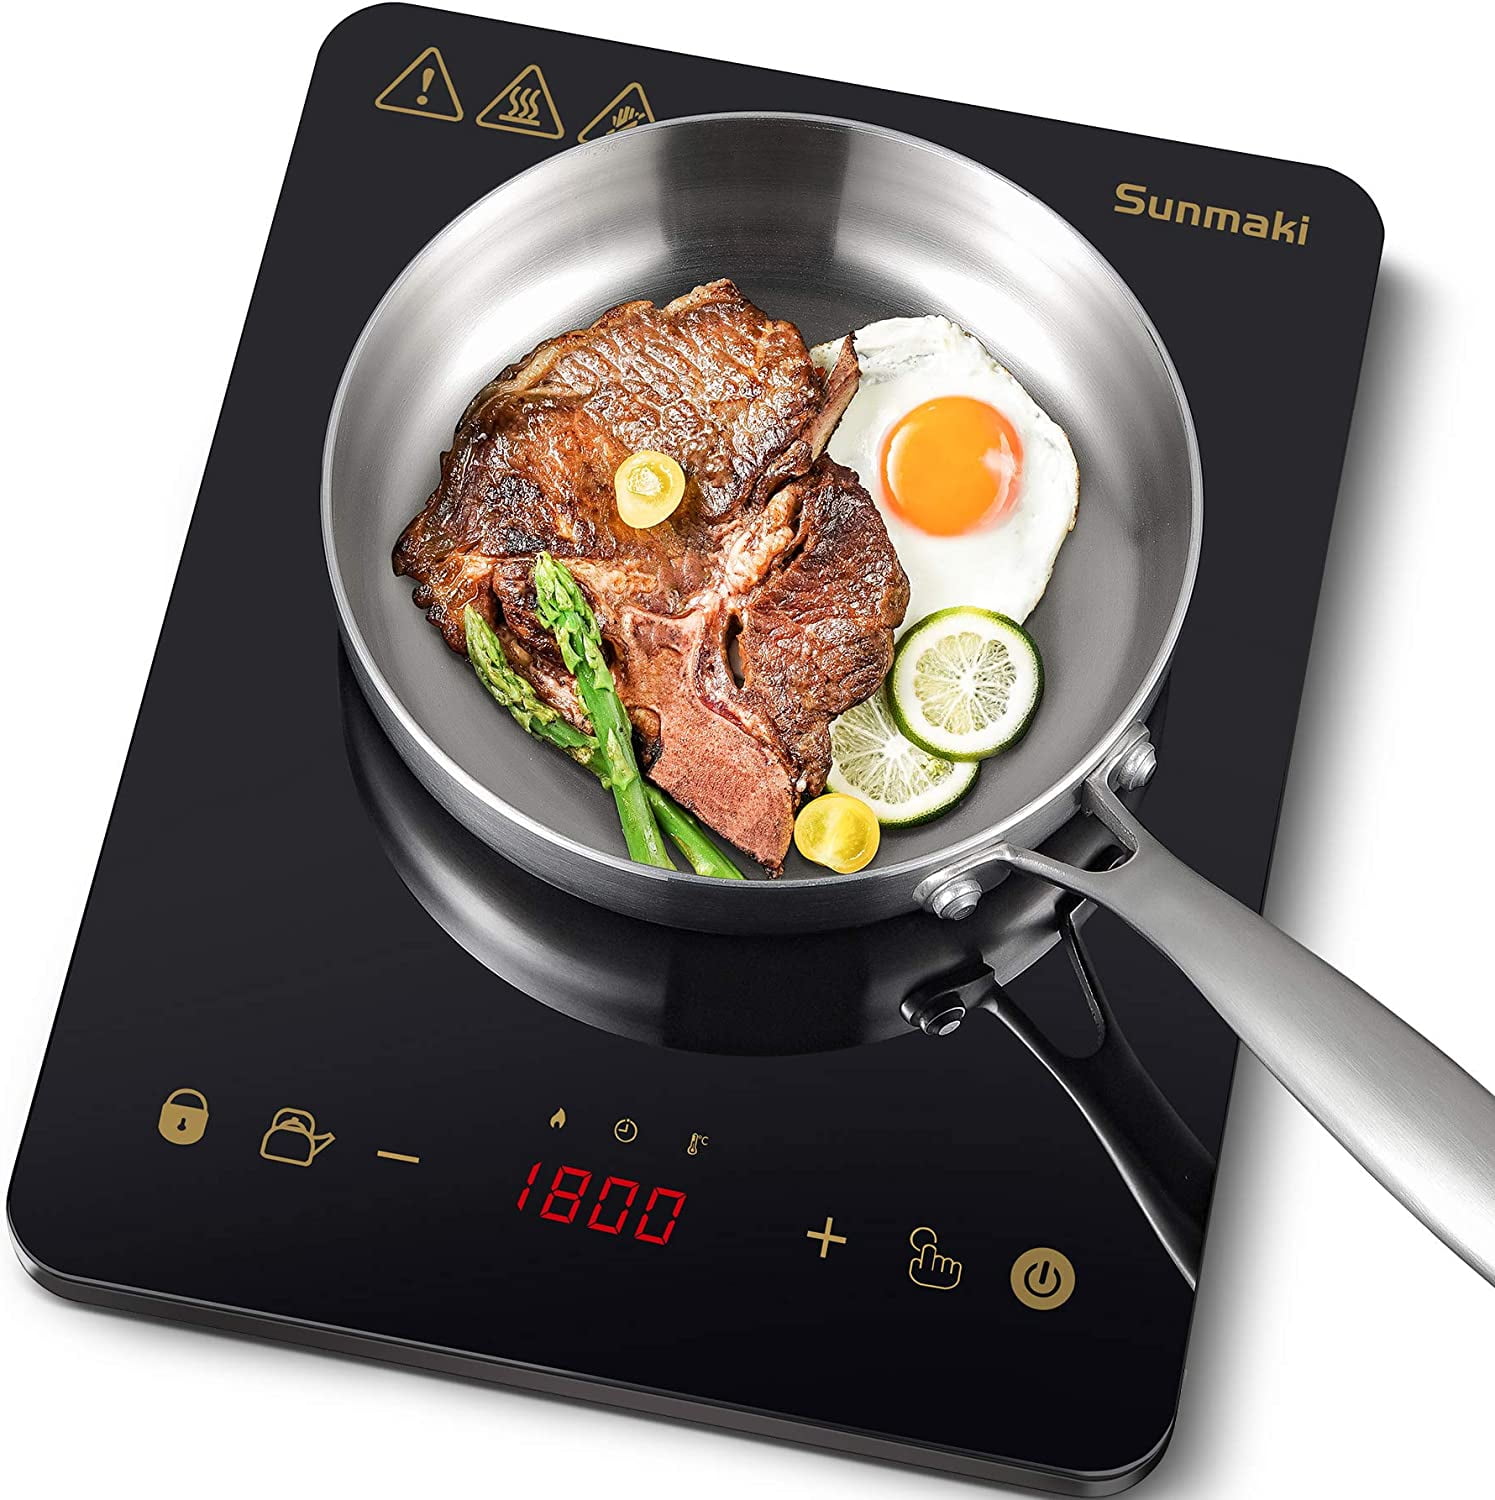 portable-induction-cooktop-sunmaki-1800w-induction-cooker-with-safety